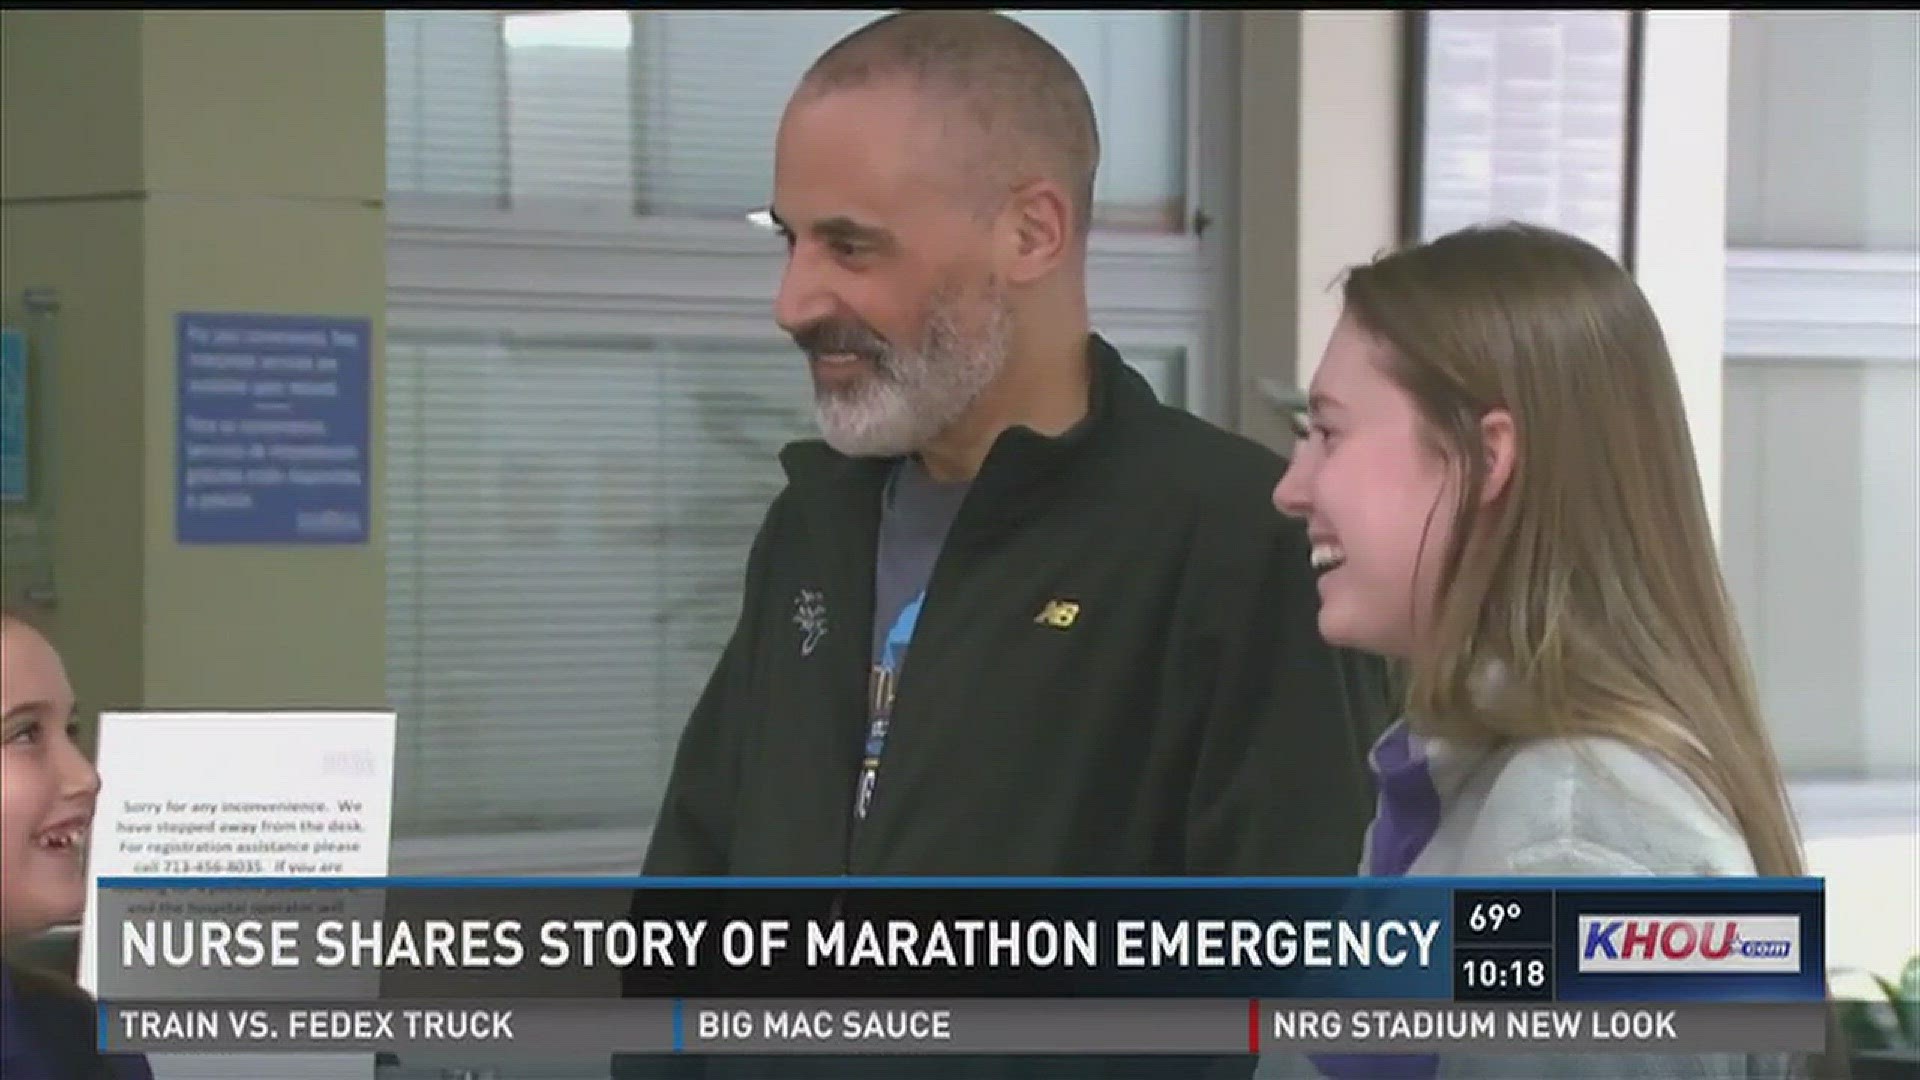 COLLEGE STATION, Texas- Rand Mintzer says he is a lucky person. He was able to leave the hospital last week after almost dying while running in the Houston Marathon.